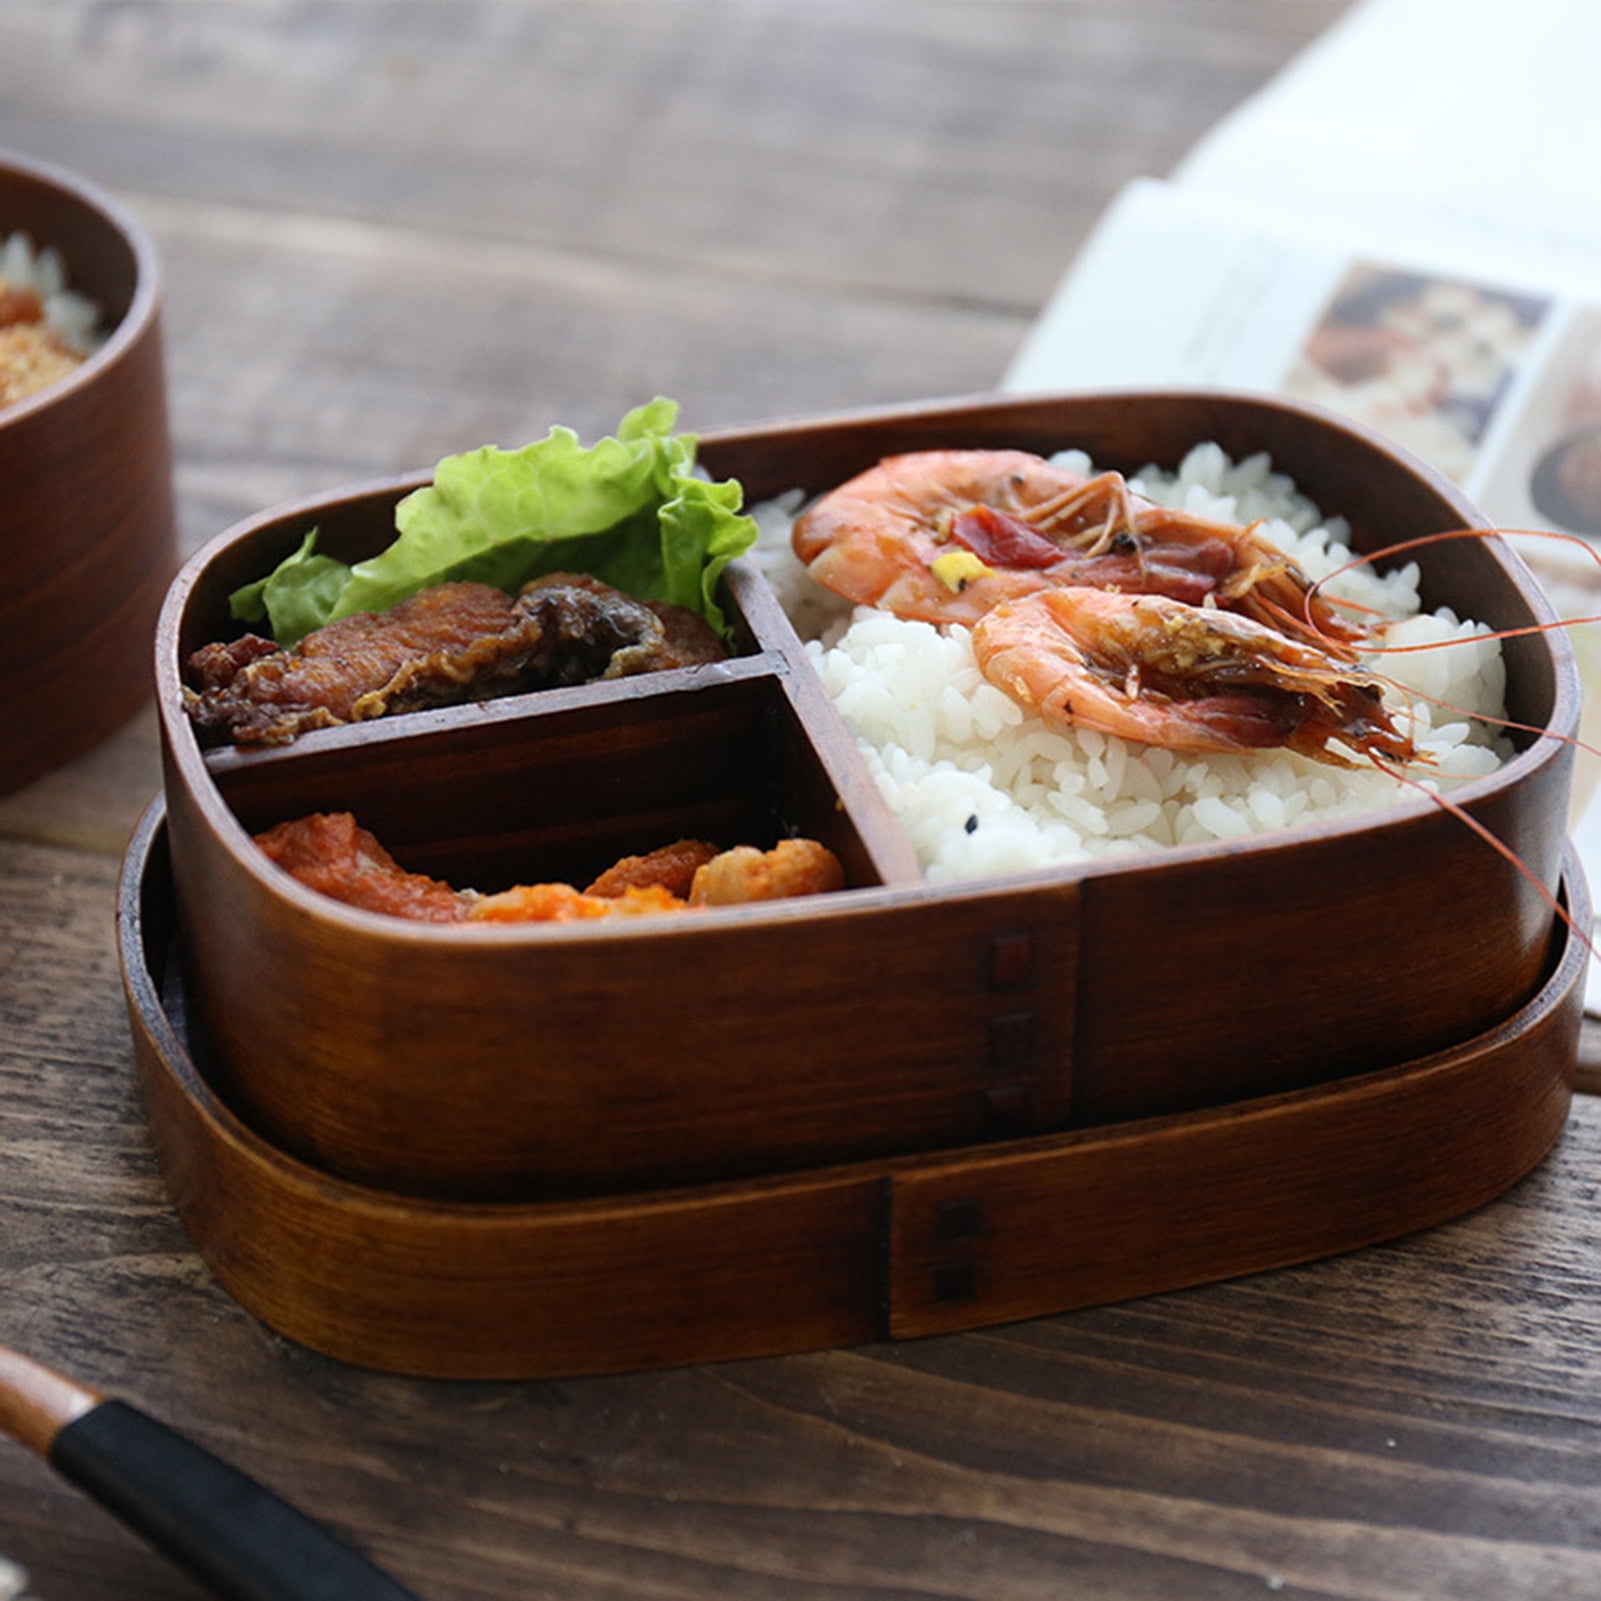 Wood Grain Double-layer Bento Box With Tableware, Insulated Food